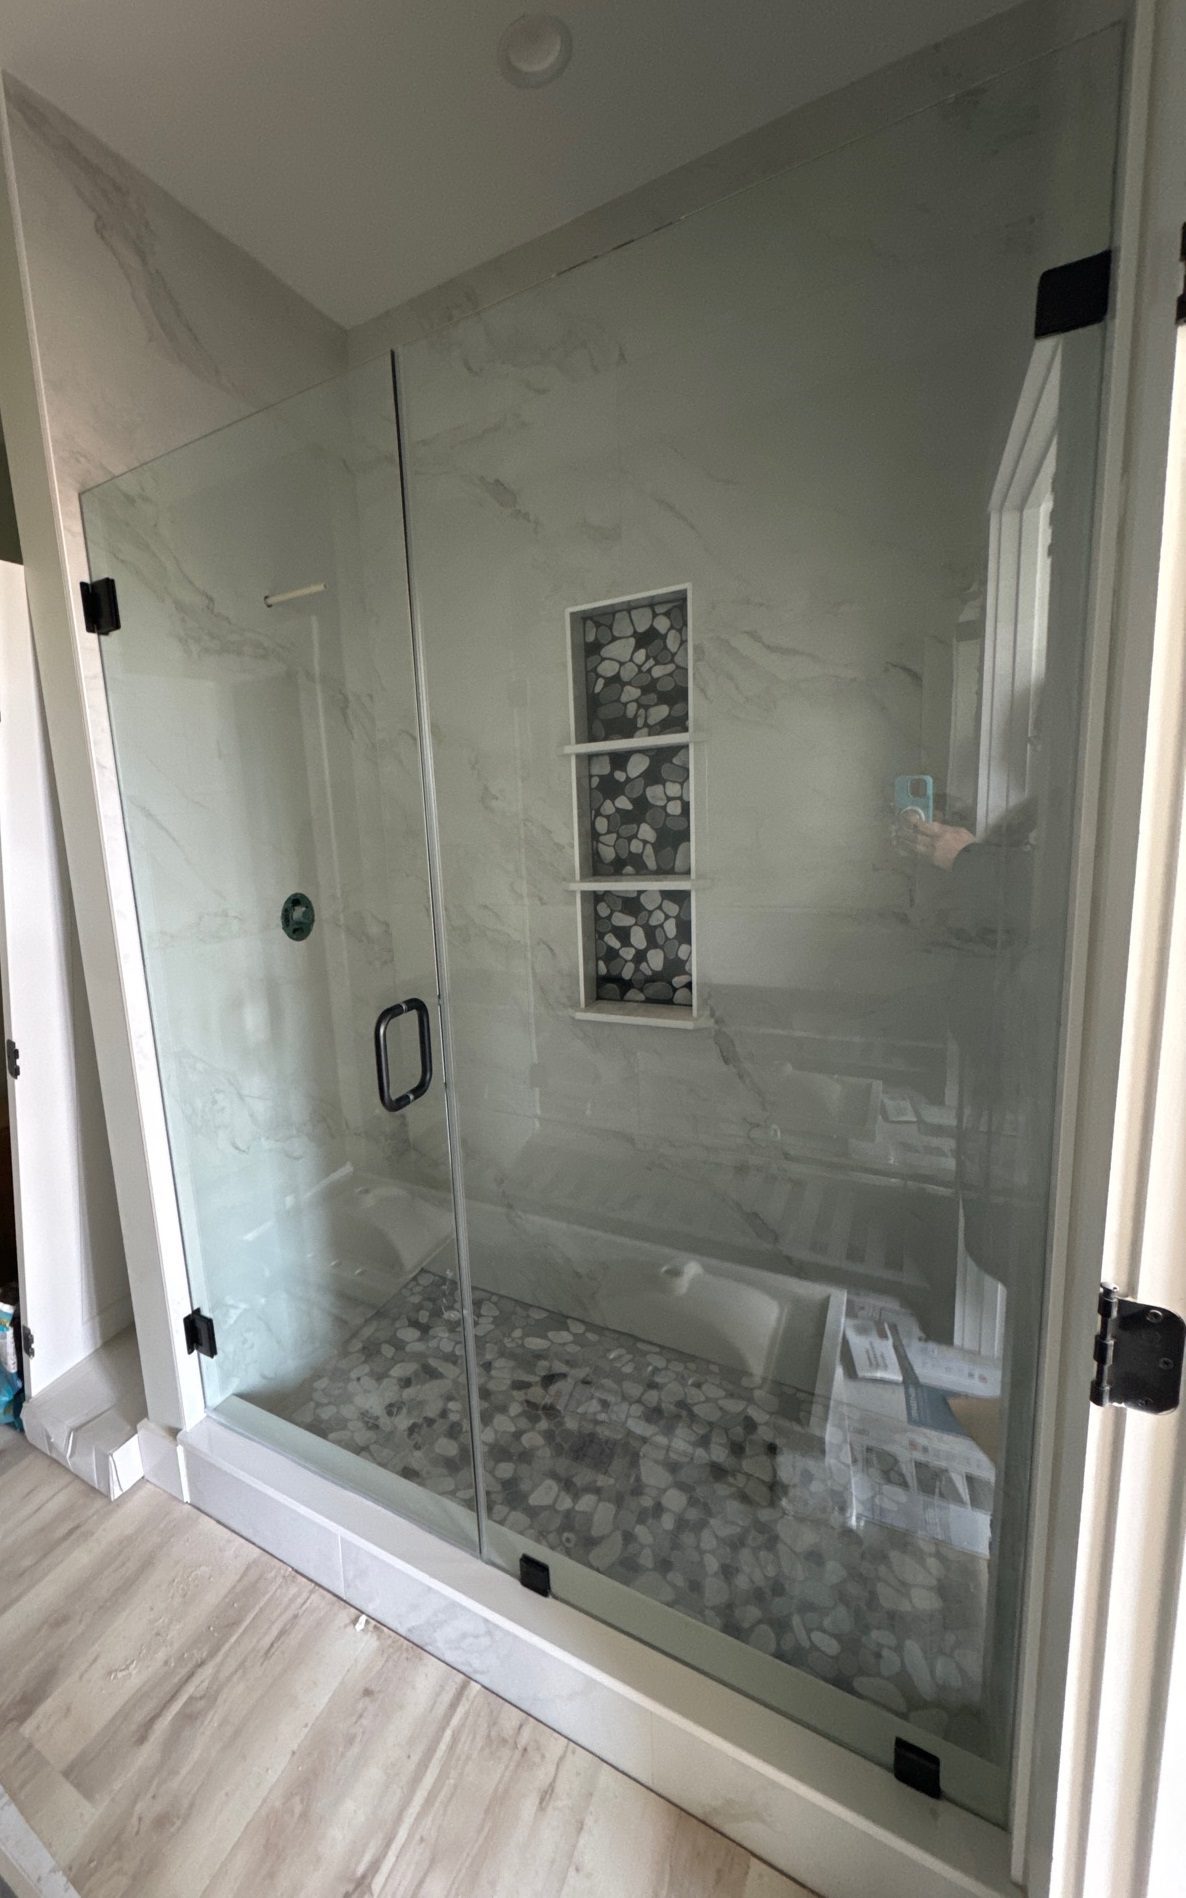 New shower glass with stone look bottom and marble look surround